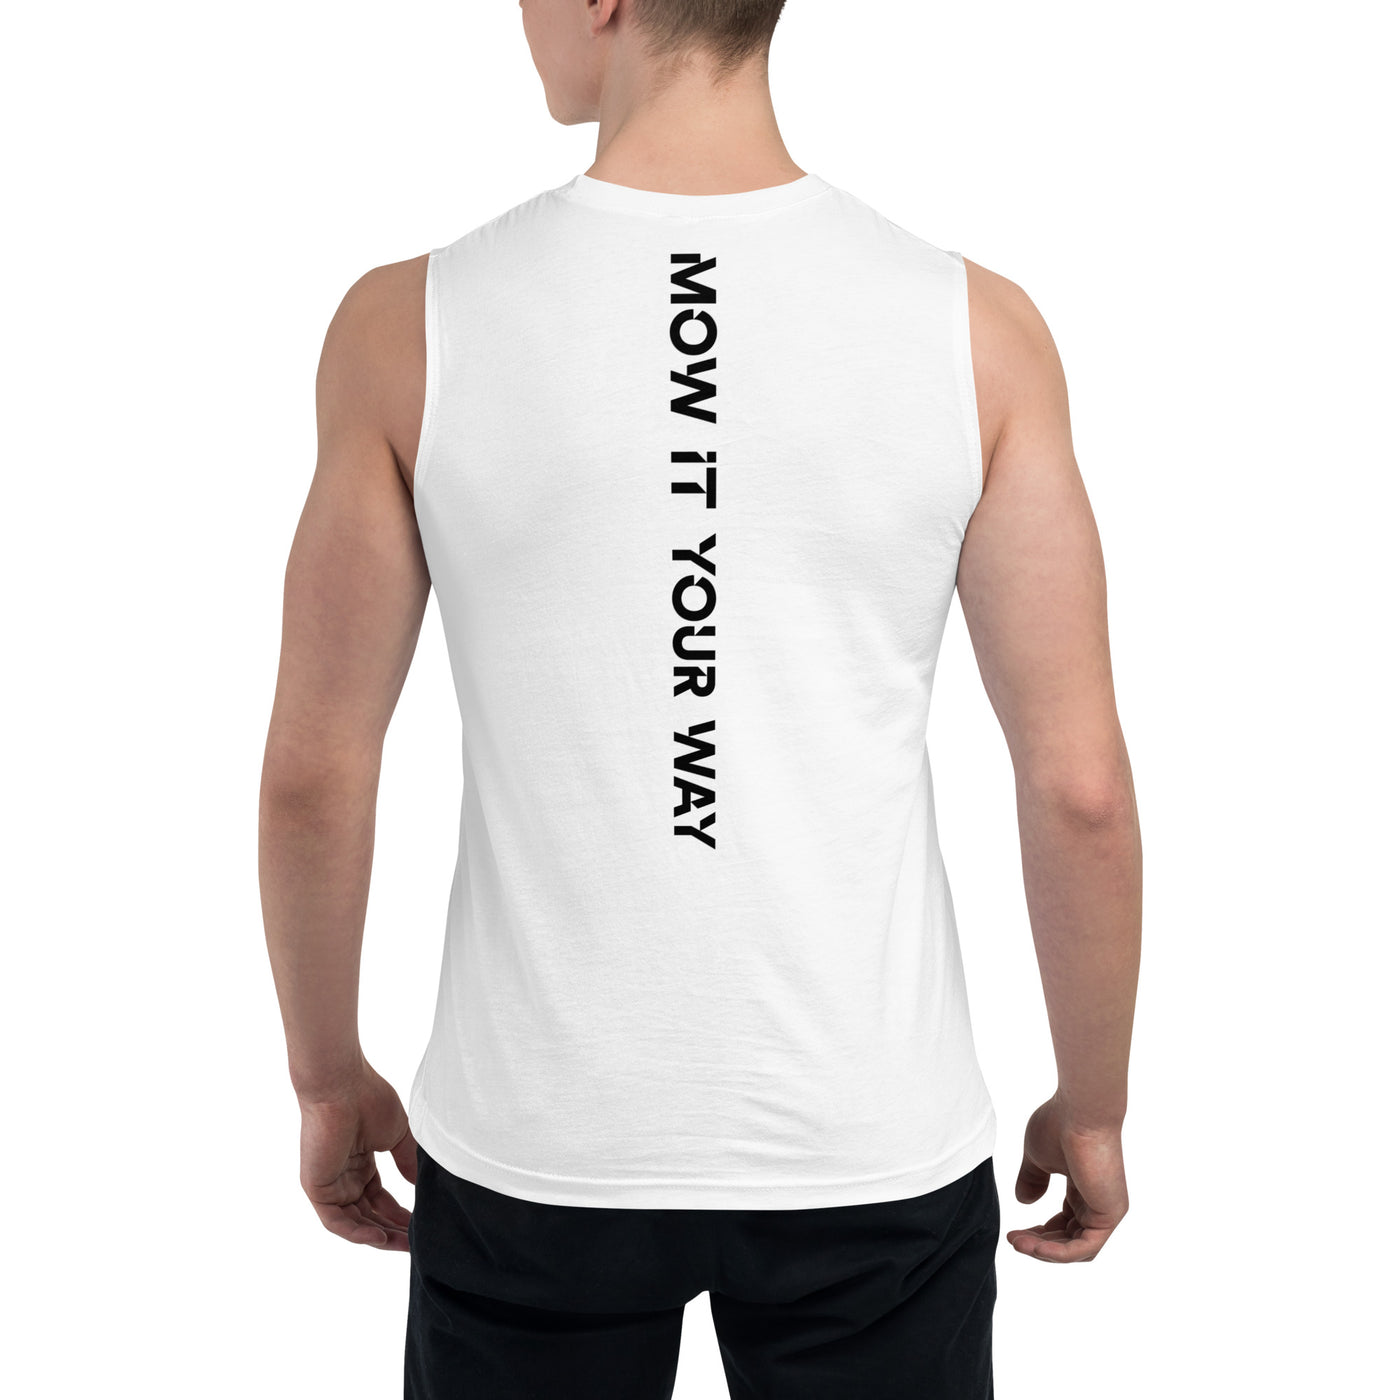 Muscle Shirt - Mow it your way